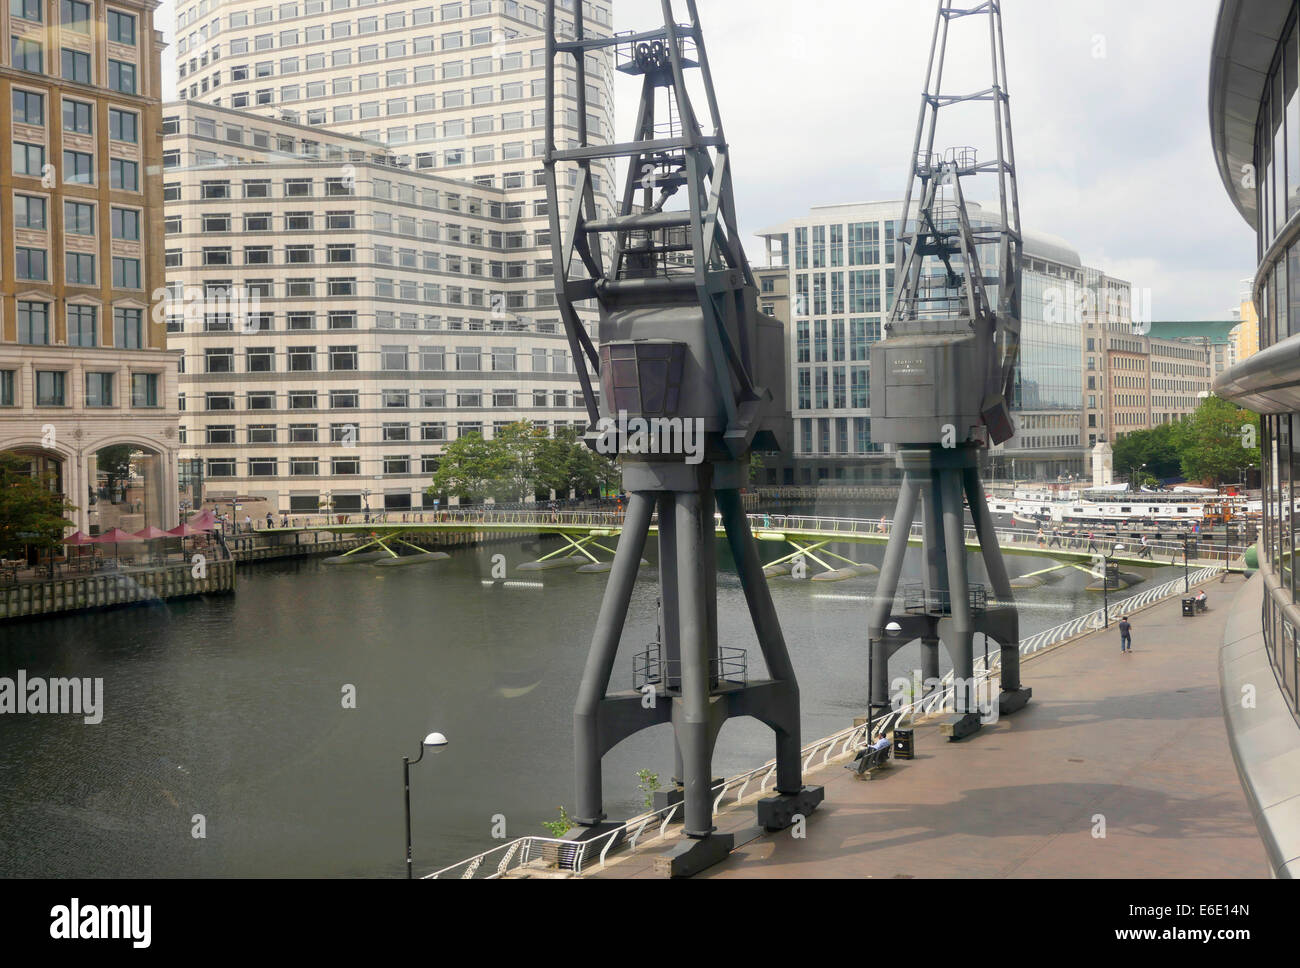 Old cargo cranes outside London Marriott Hotel at West India Quay, London Docklands, England Stock Photo